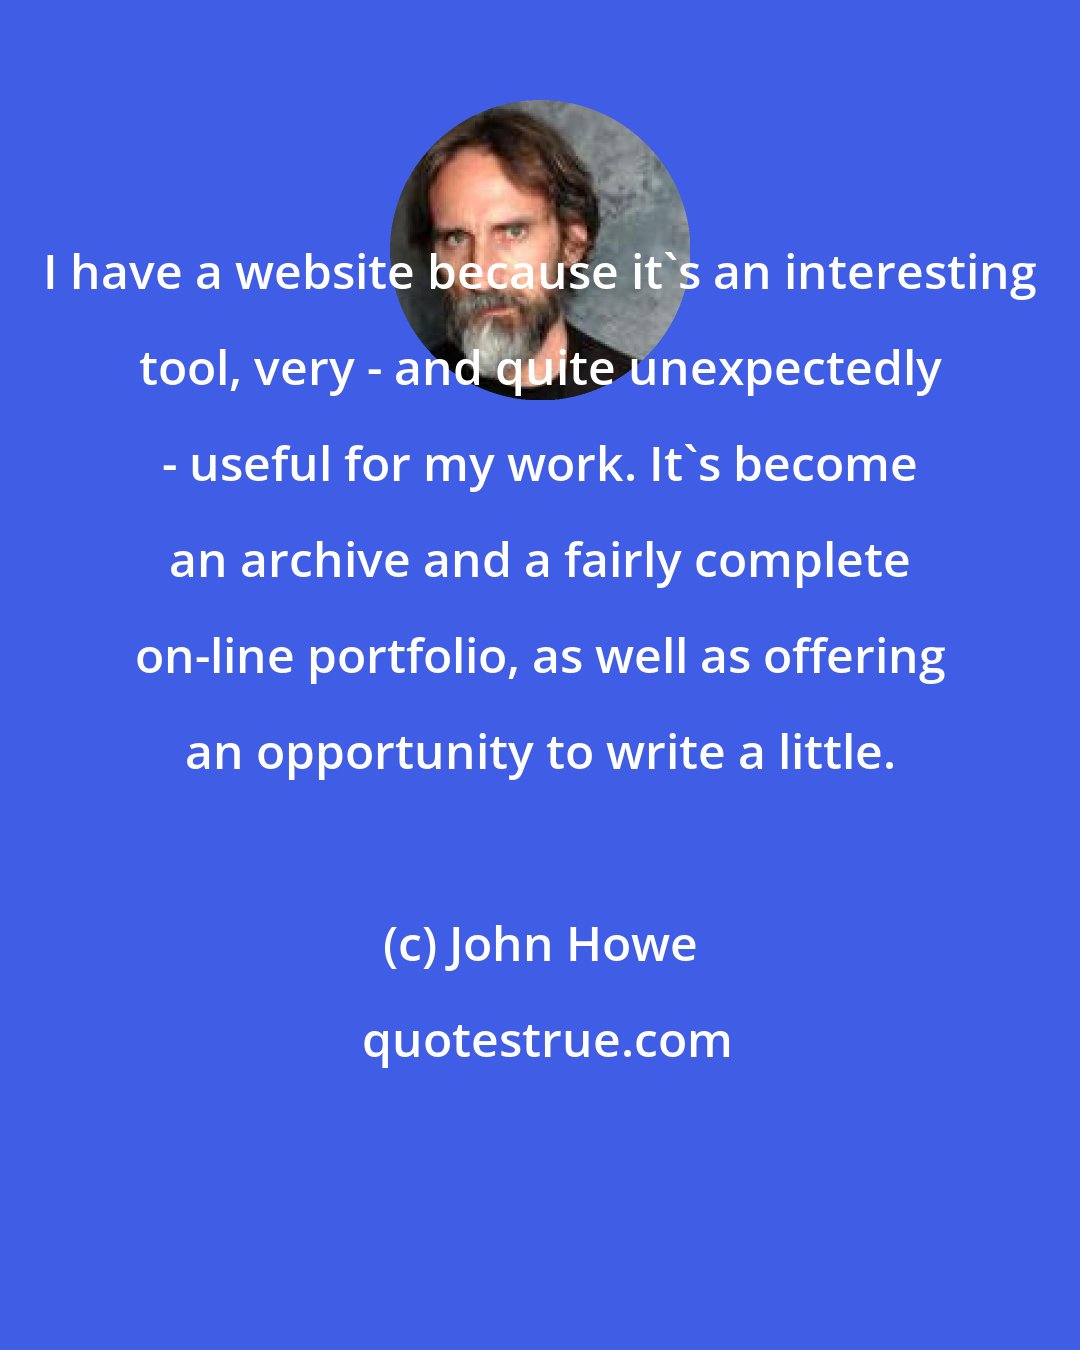 John Howe: I have a website because it's an interesting tool, very - and quite unexpectedly - useful for my work. It's become an archive and a fairly complete on-line portfolio, as well as offering an opportunity to write a little.